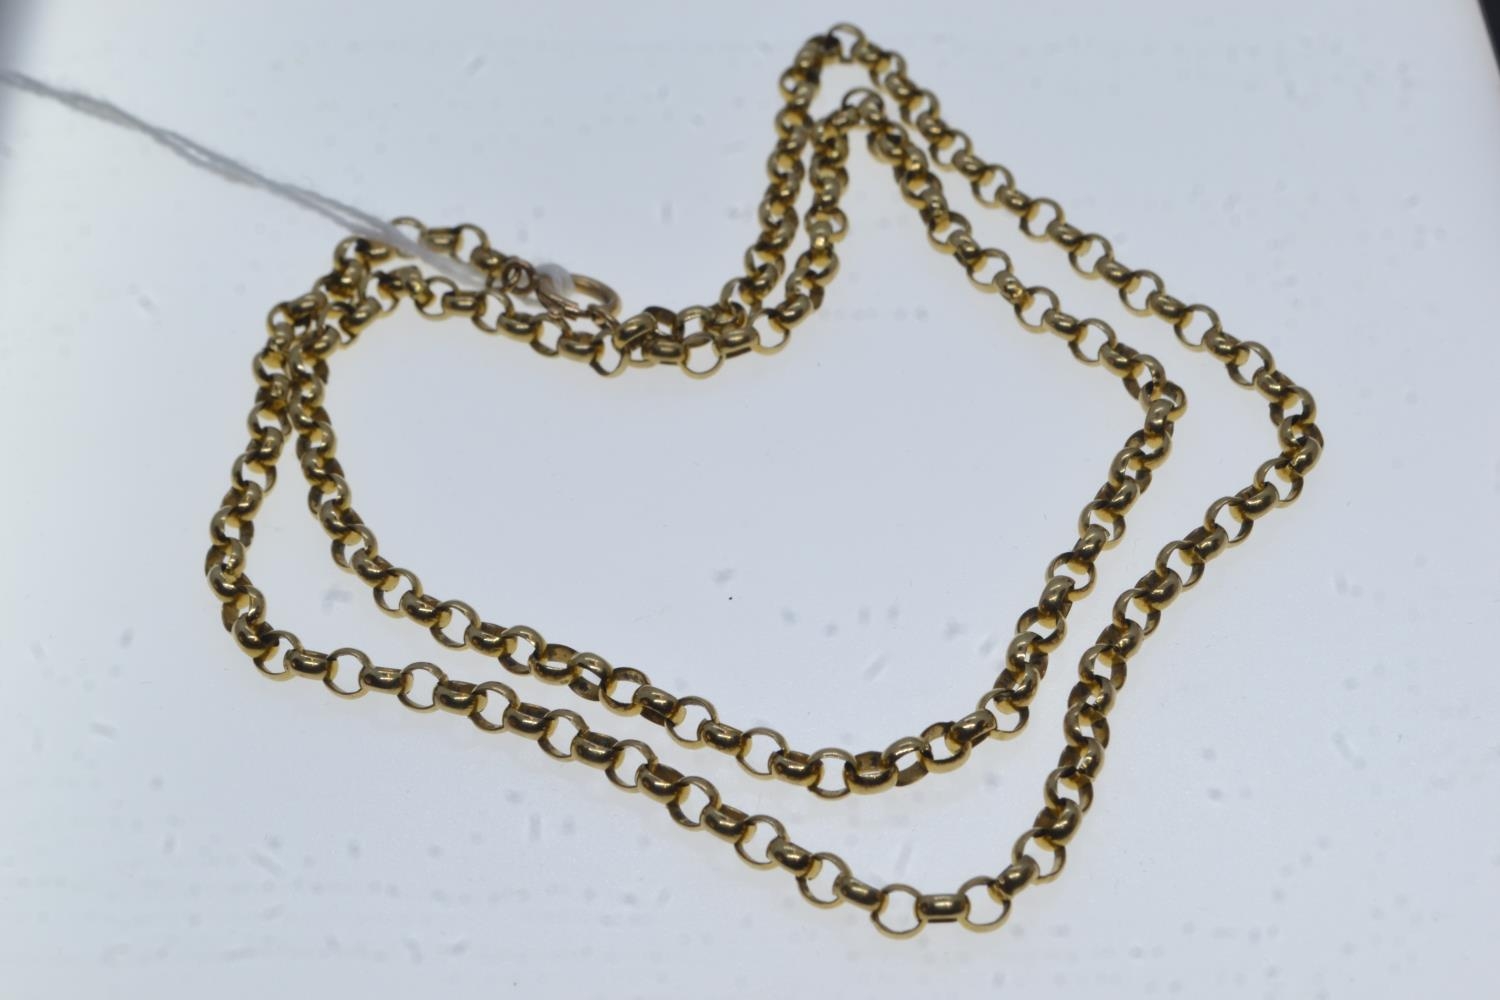 9ct gold belcher neck chain, circumference 600mm, 17.6 grams 